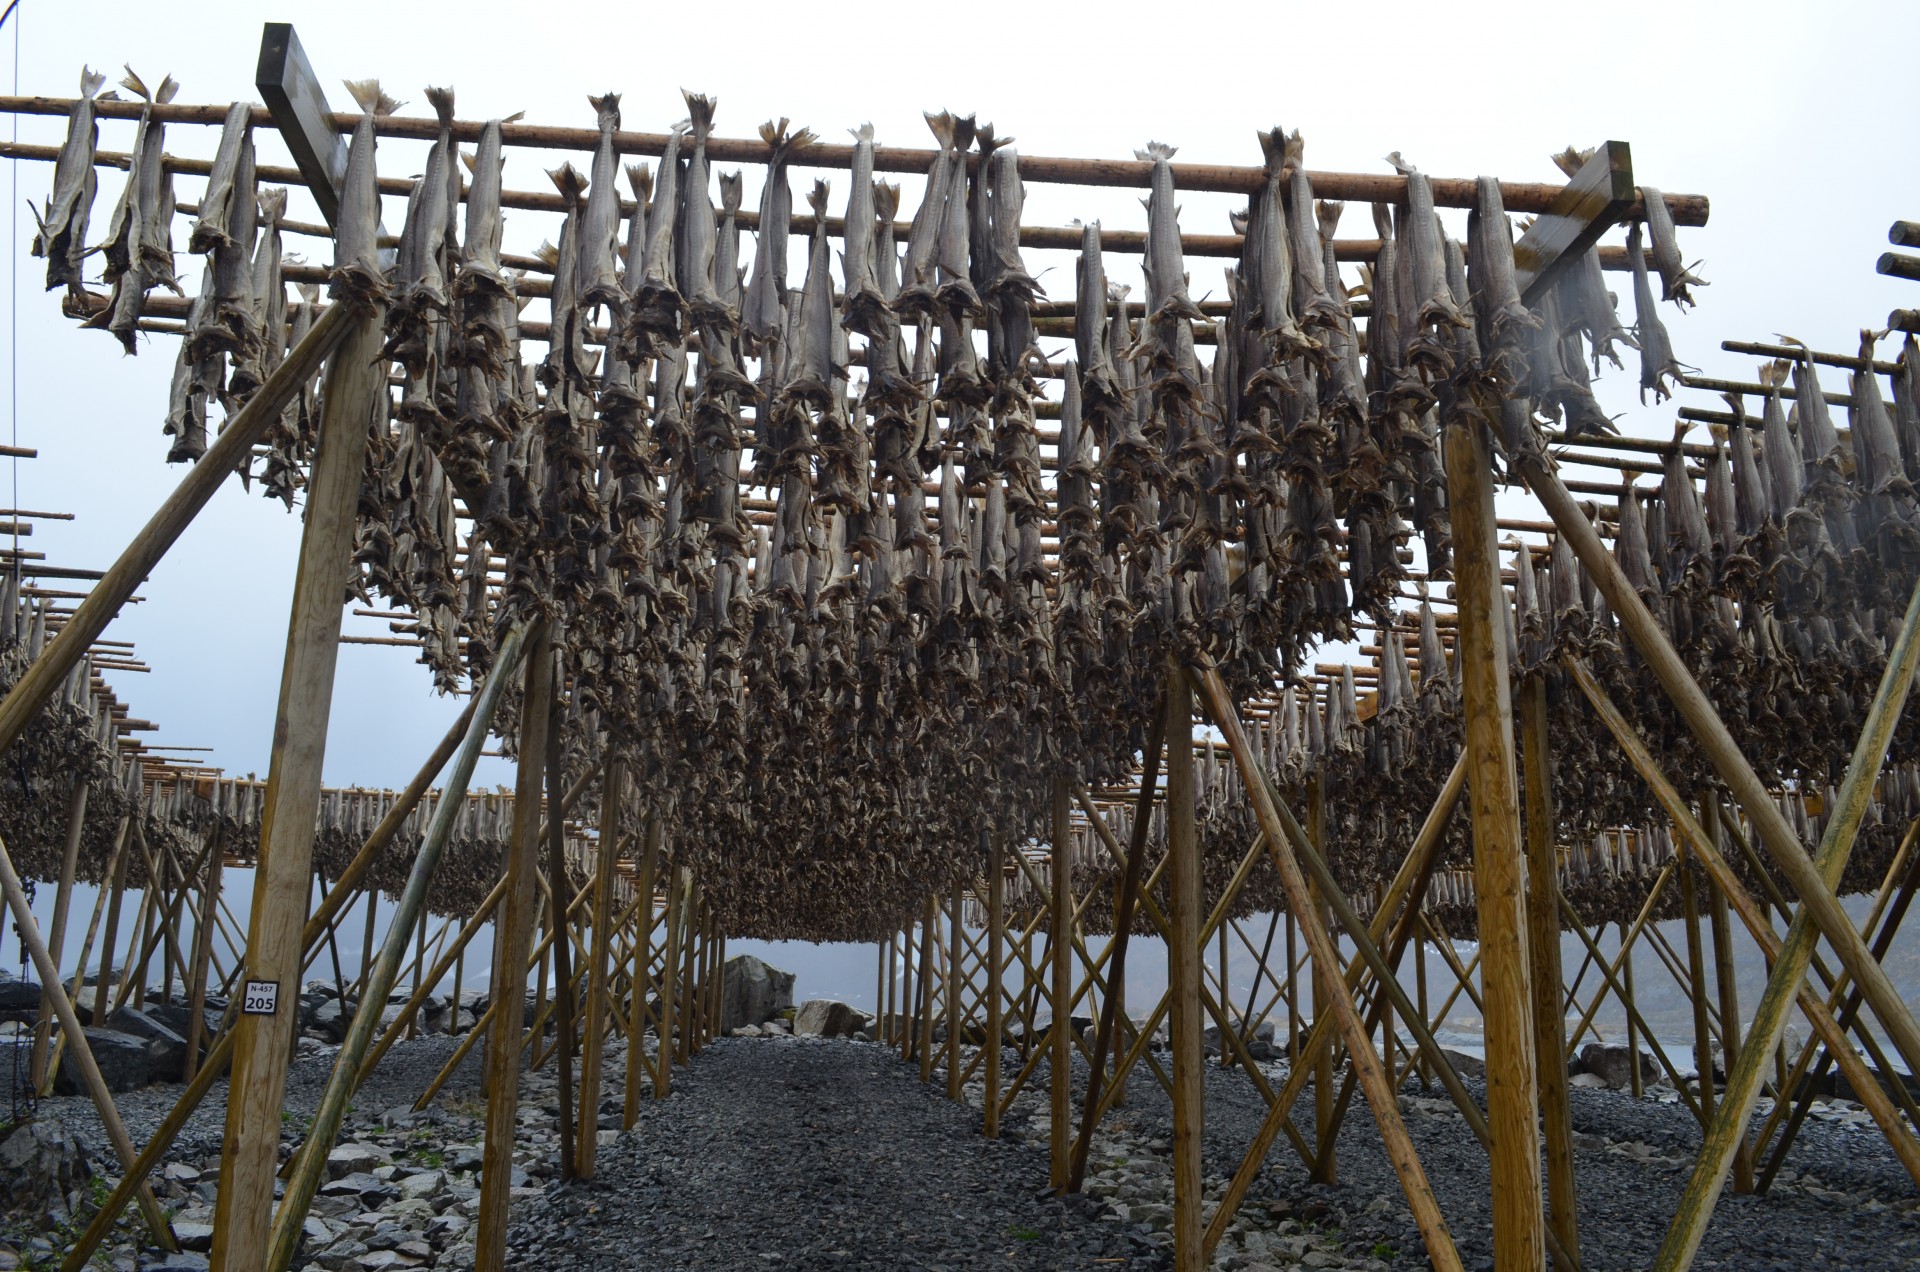 Top: Looking over the prow of a replica Viking ship; the originals were used for fishing as well as raiding. Bottom: Cod, drying on racks in the fishing village of Sund, were probably a staple for early islanders, and still are. 